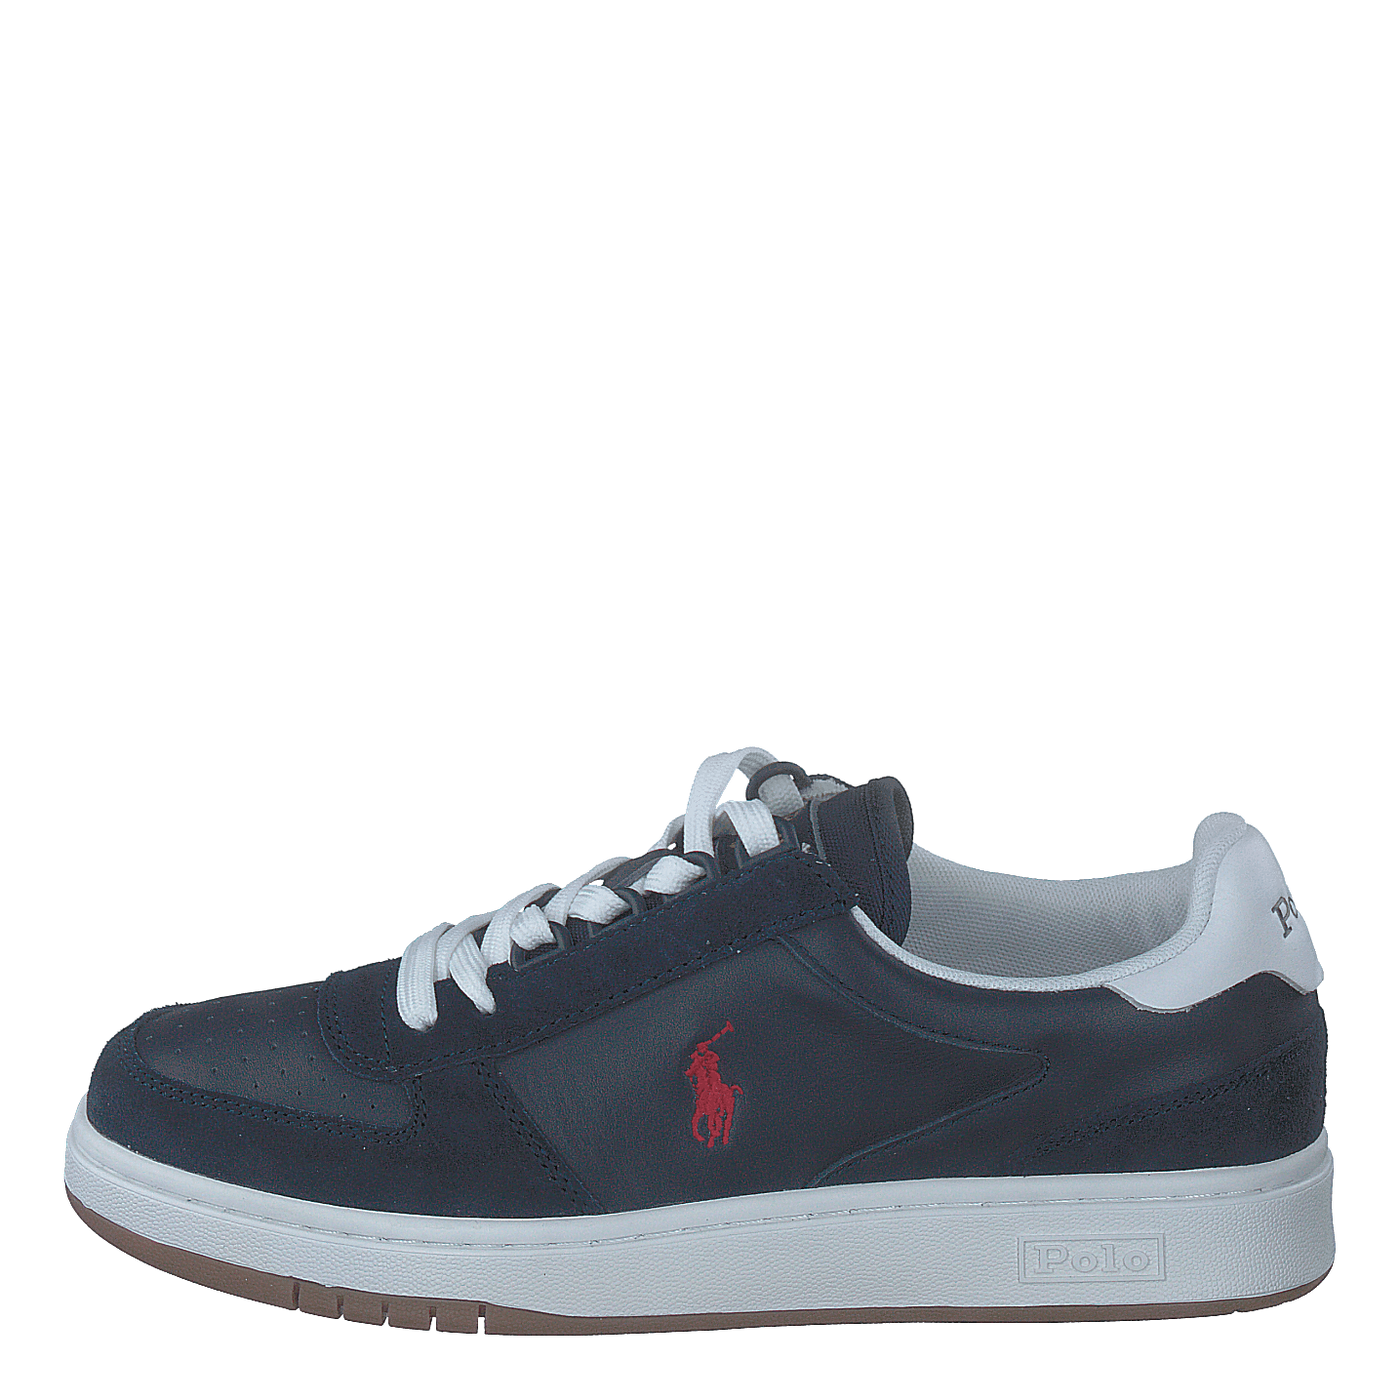 Court Leather-Suede Sneaker Newport Navy / RL2000 Red PP